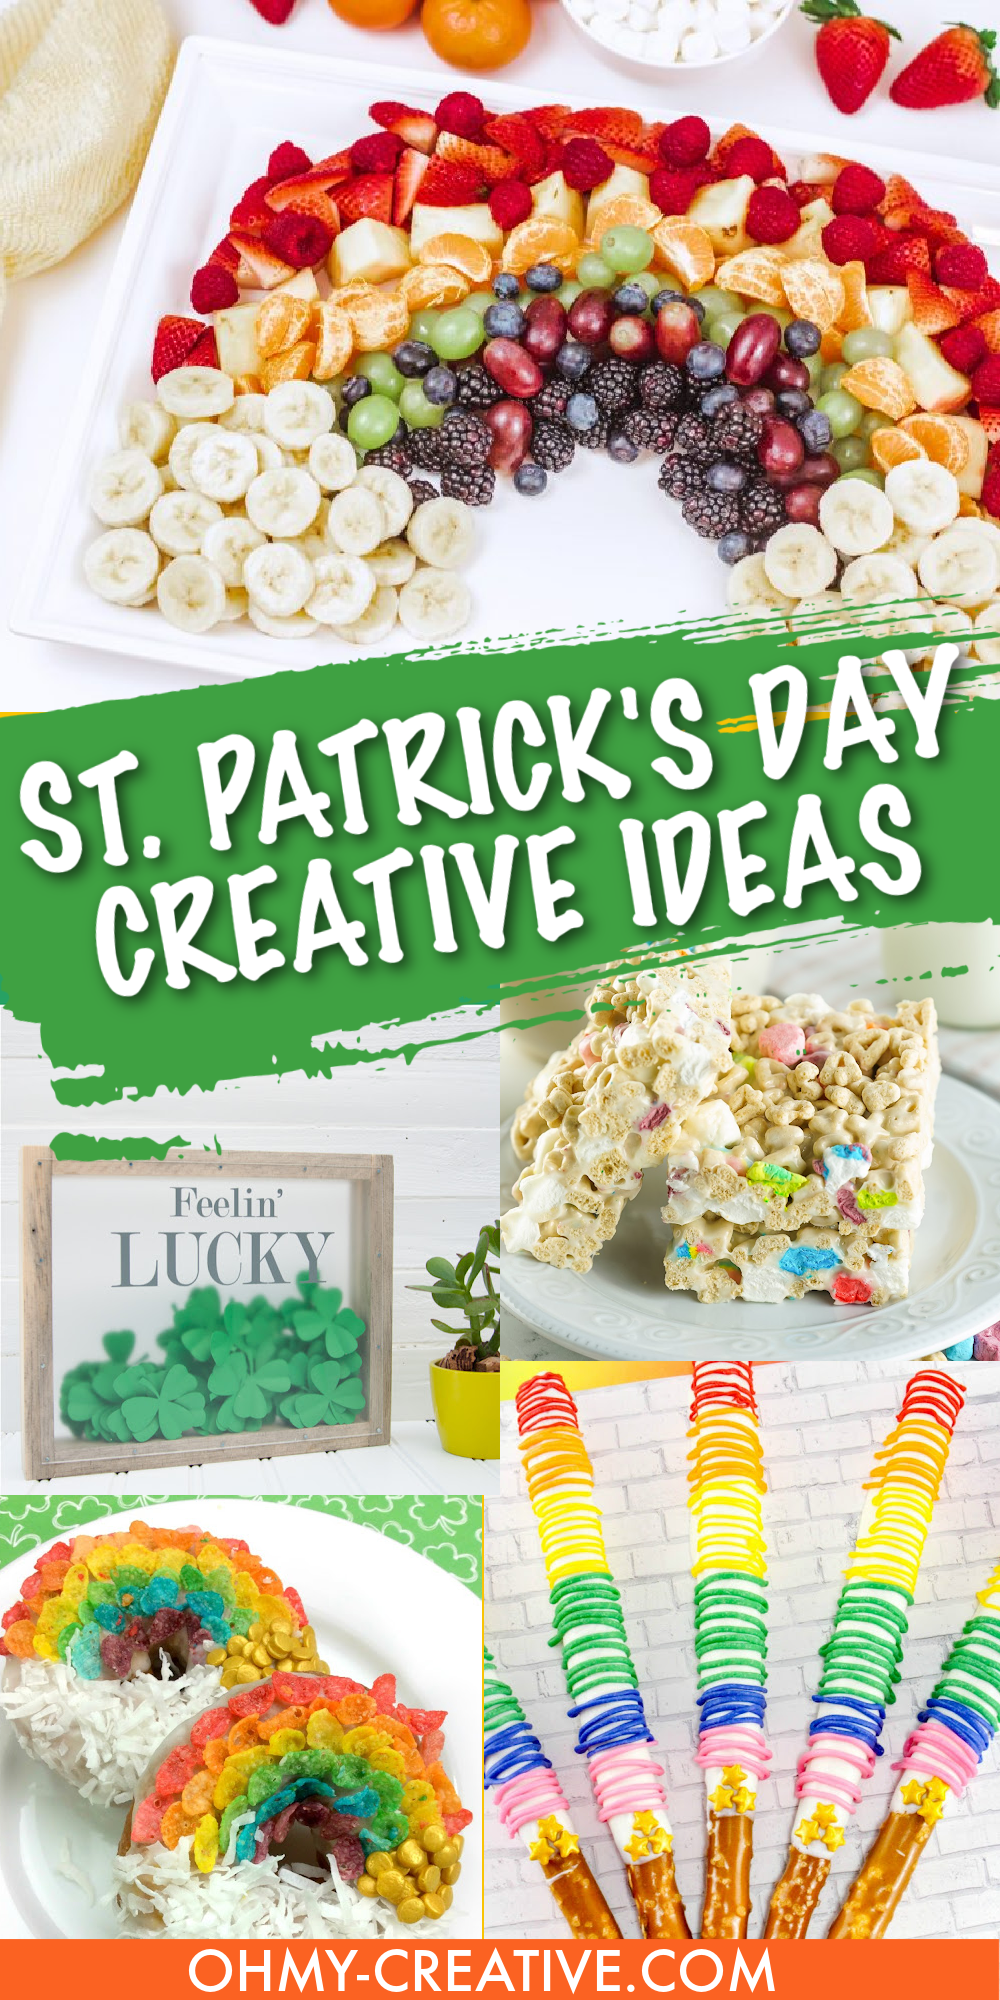 A collage of St. Patrick's Day ideas including crafts, recipes, printables to celebrate the holiday.